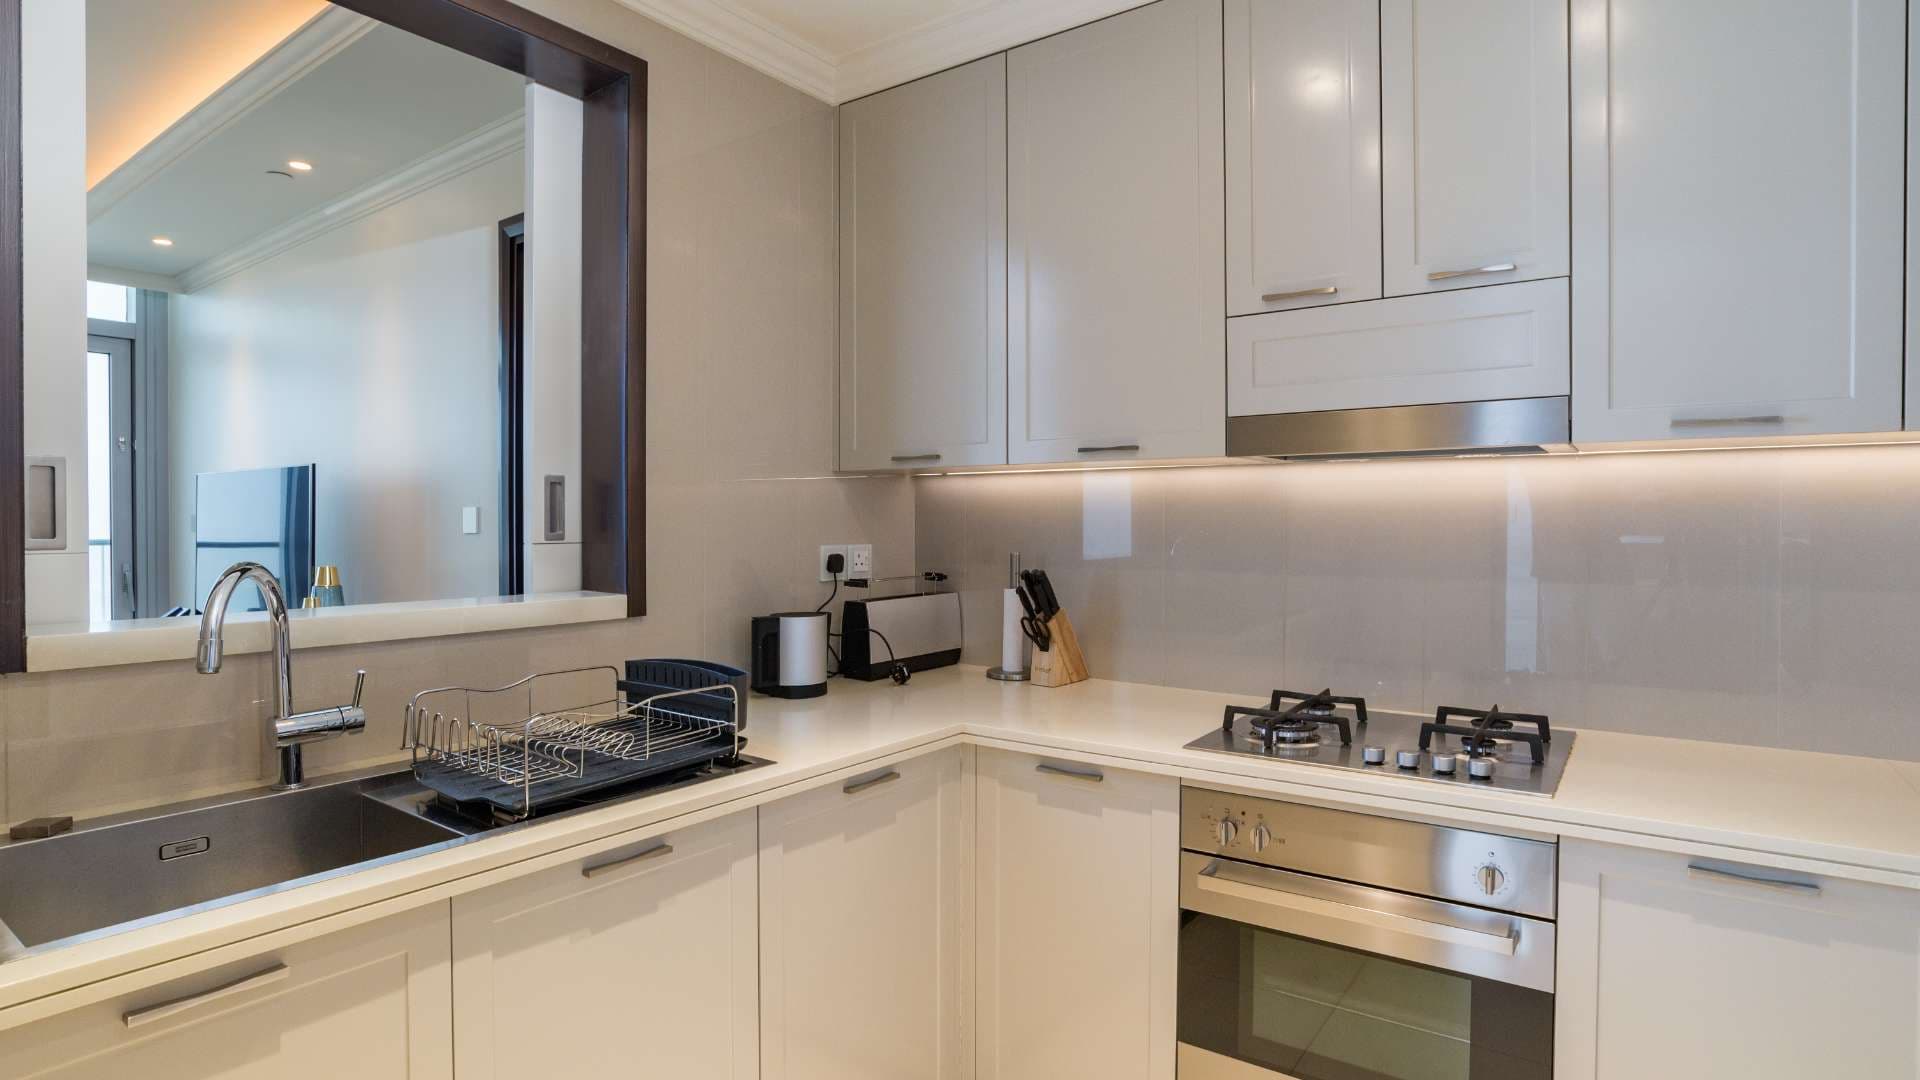 2 Bedroom Apartment For Sale The Address Residence Fountain Views Lp09123 Bb3ff39dbe40700.jpg